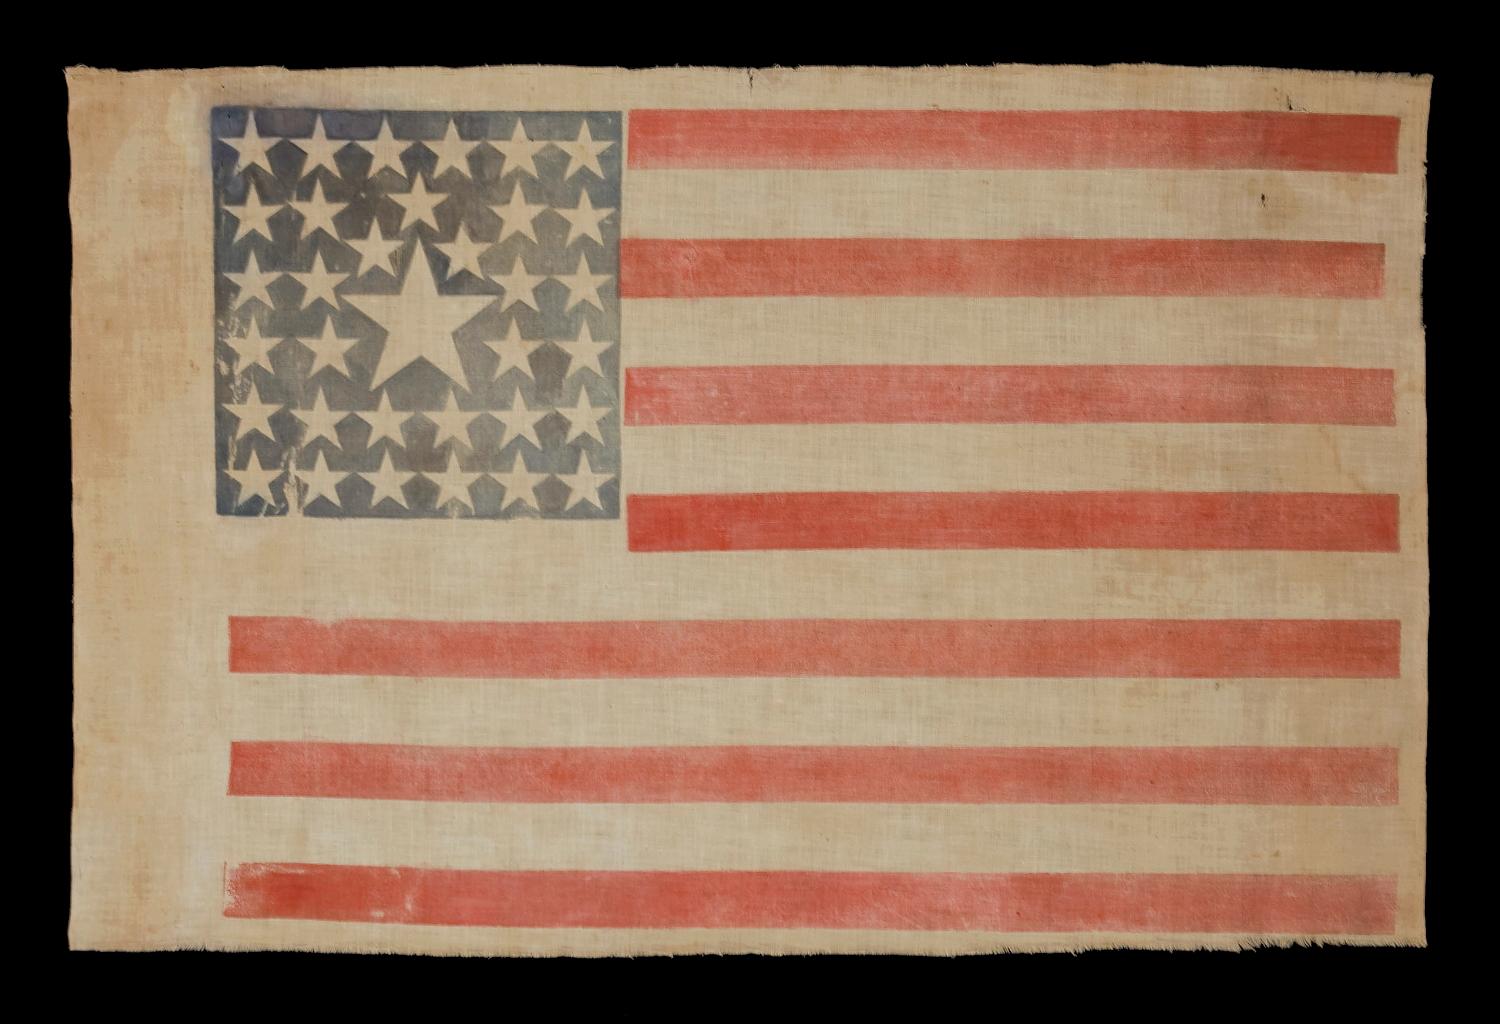 34 STARS IN A VERY RARE PATTERN THAT FEATURES A HUGE CENTER STAR IN THE MIDST OF A LINEAL STAR PATTERN, ONE-OF-A-KIND AMONG KNOWN EXAMPLES, CIVIL WAR PERIOD, 1861-63, KANSAS STATEHOOD


Early flags are collected for many reasons, but one of the